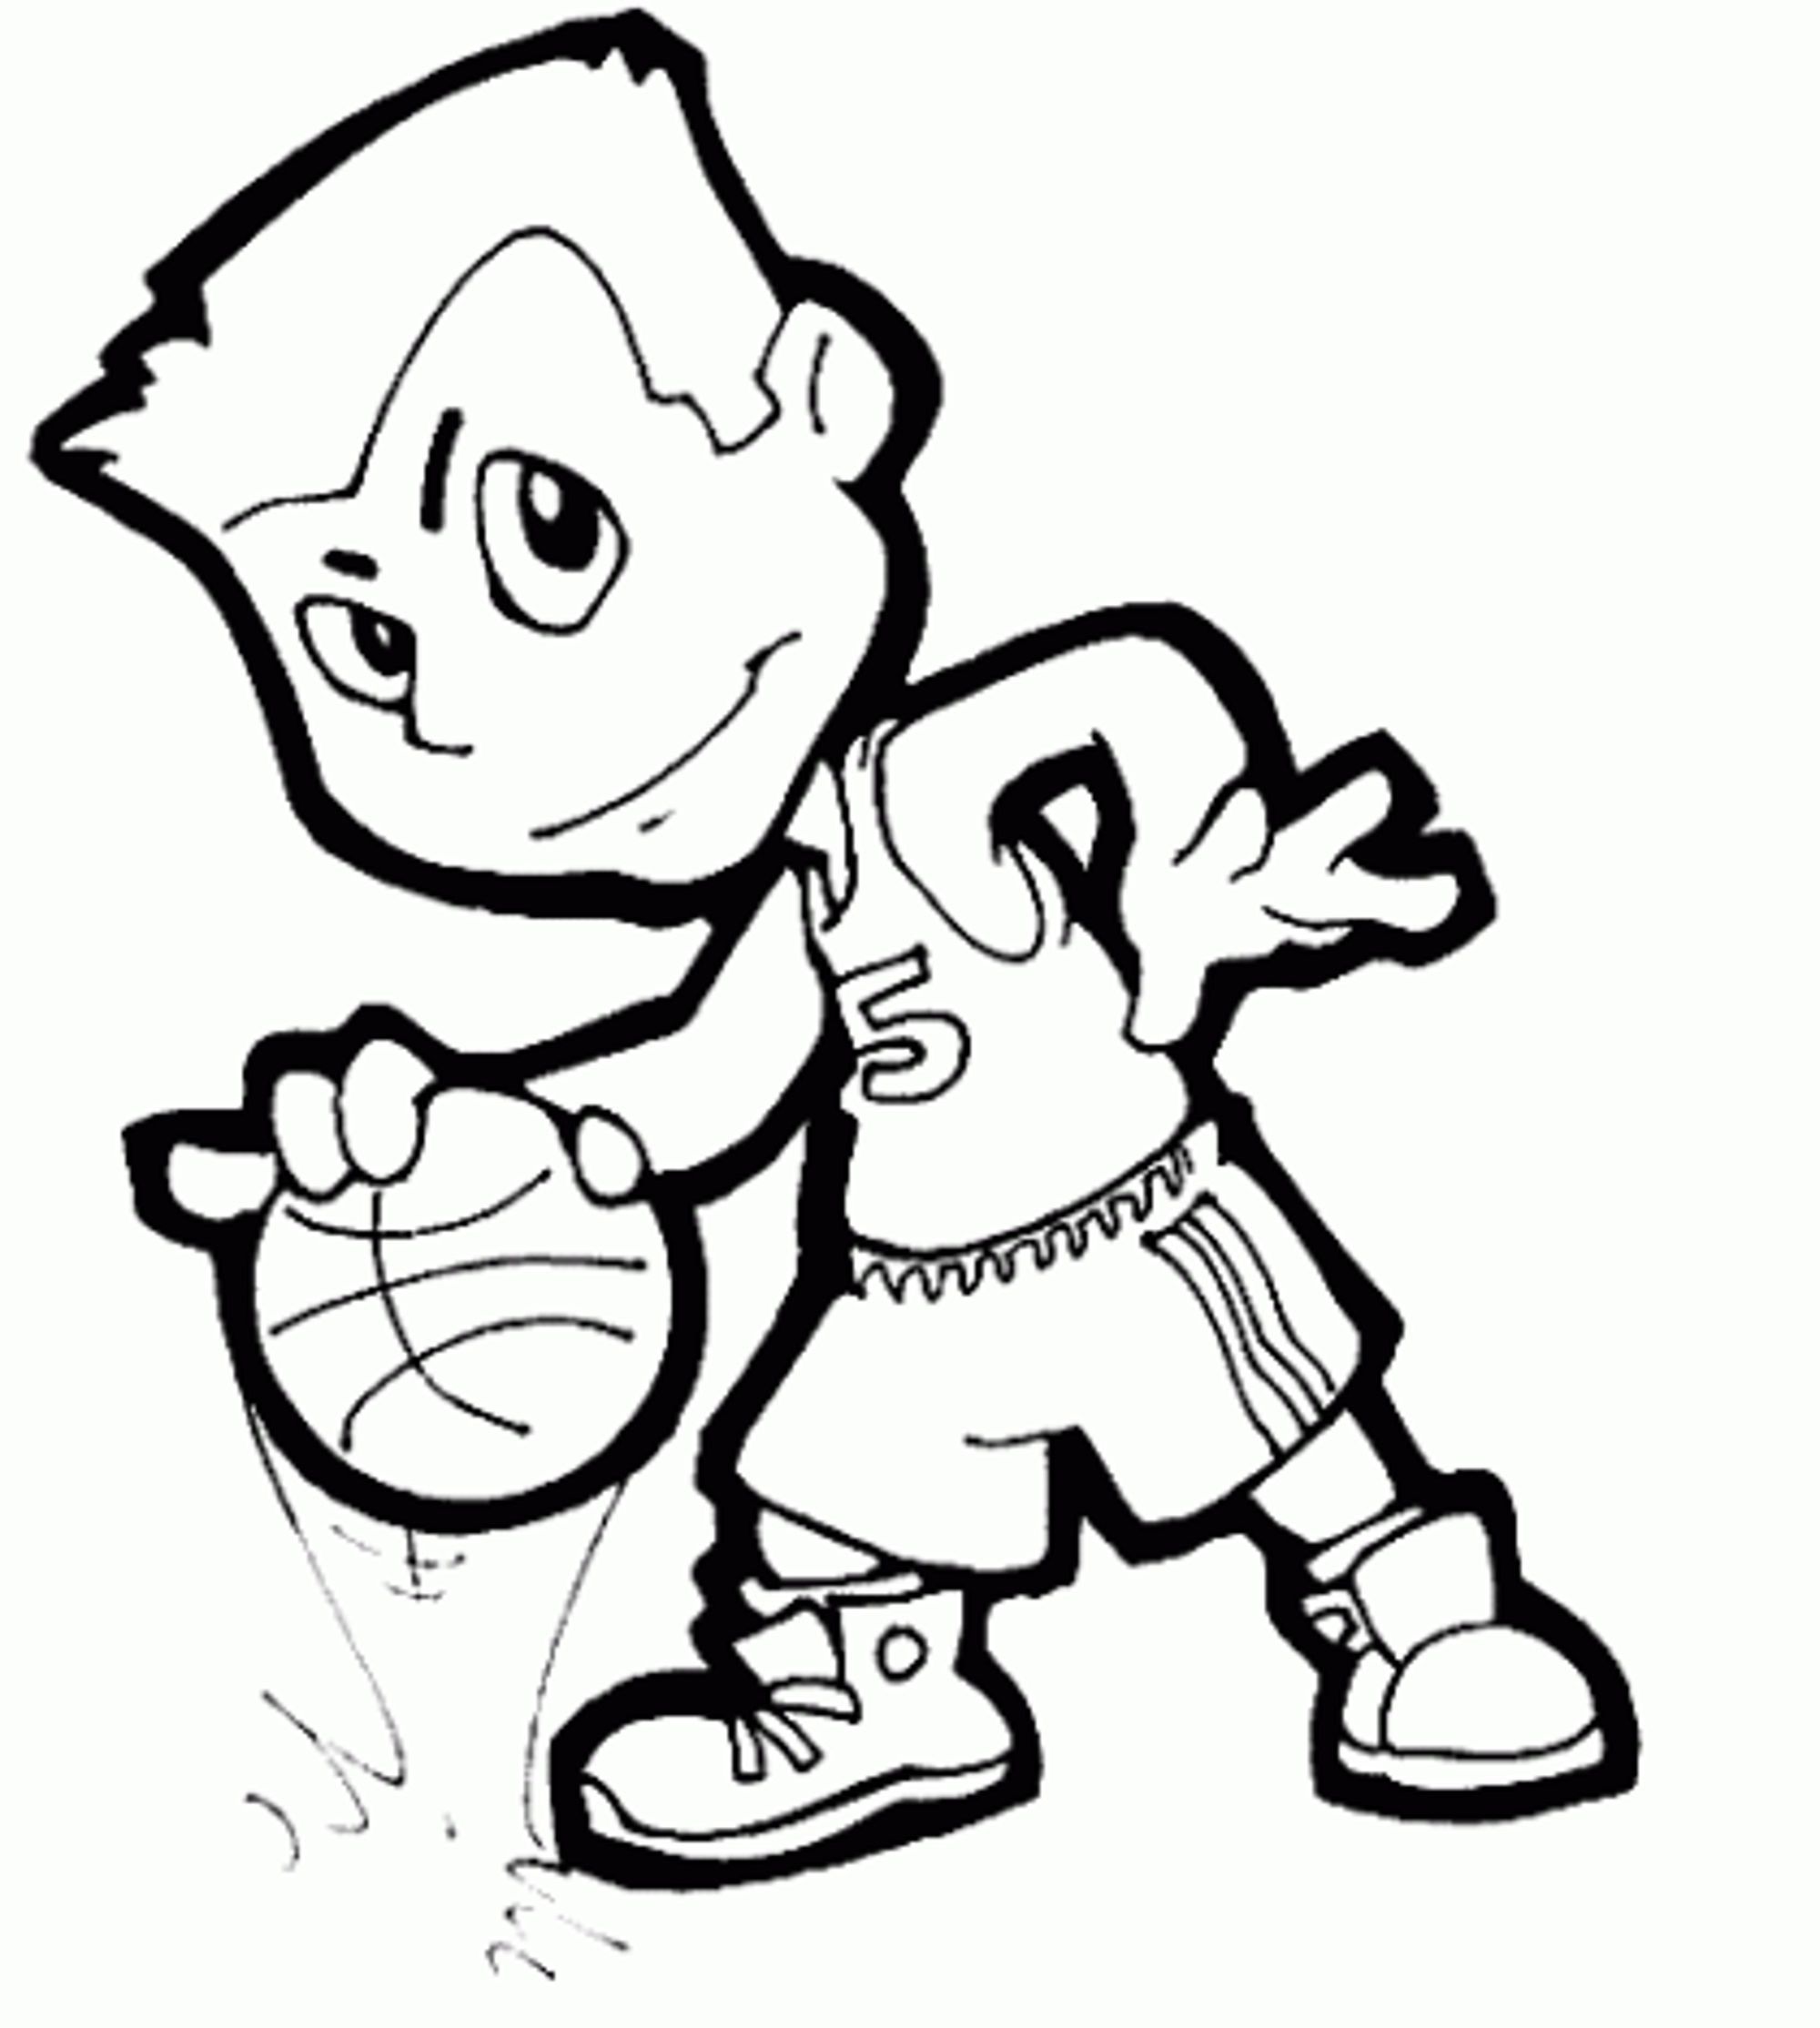 Download Print & Download - Interesting Basketball Coloring Pages